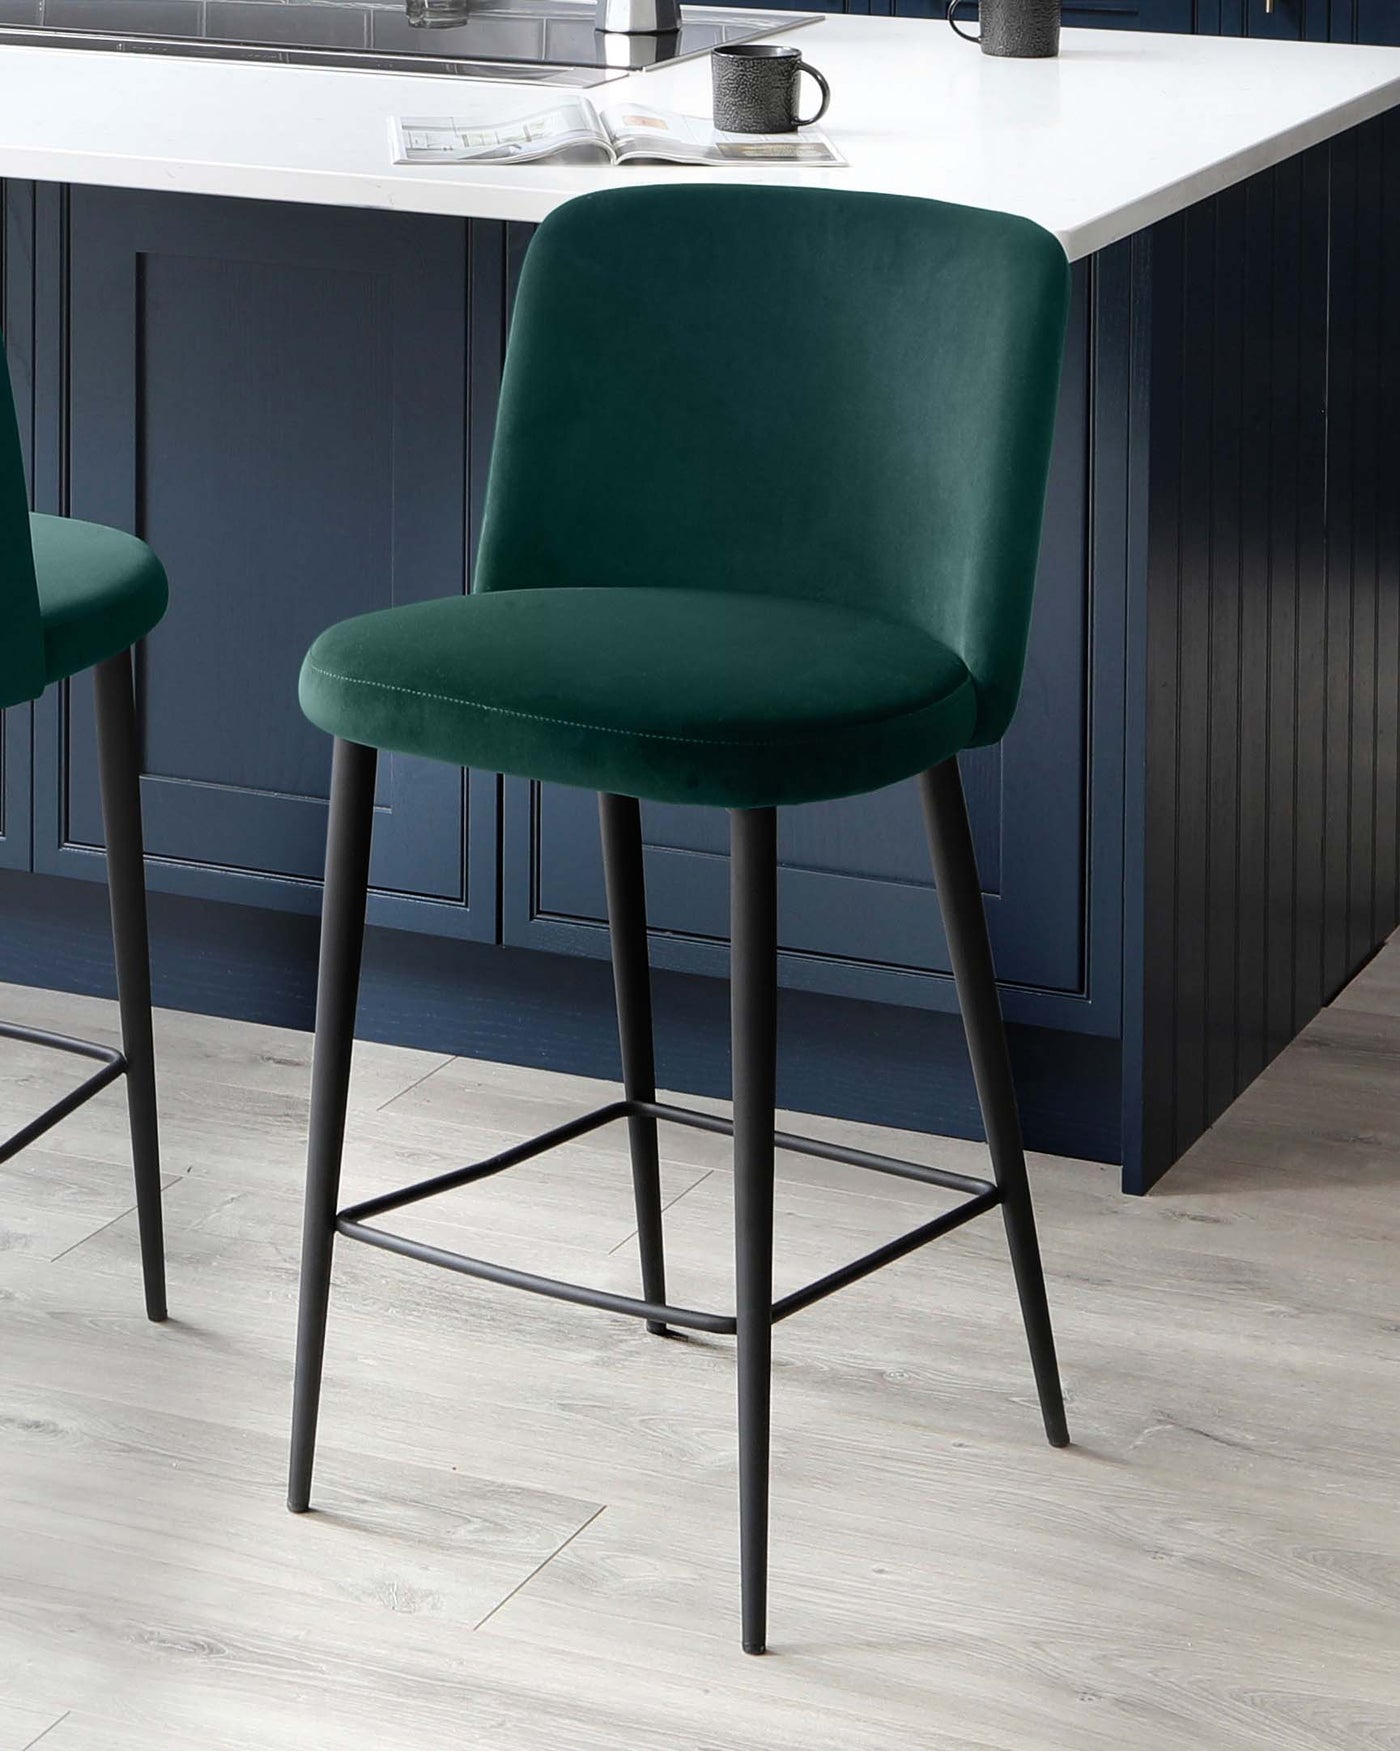 Elegant modern bar stools with luxurious dark green velvet upholstery and sleek black metal legs, featuring a minimalist backrest and footrest, showcased in a stylish kitchen with a white countertop and dark blue cabinetry.